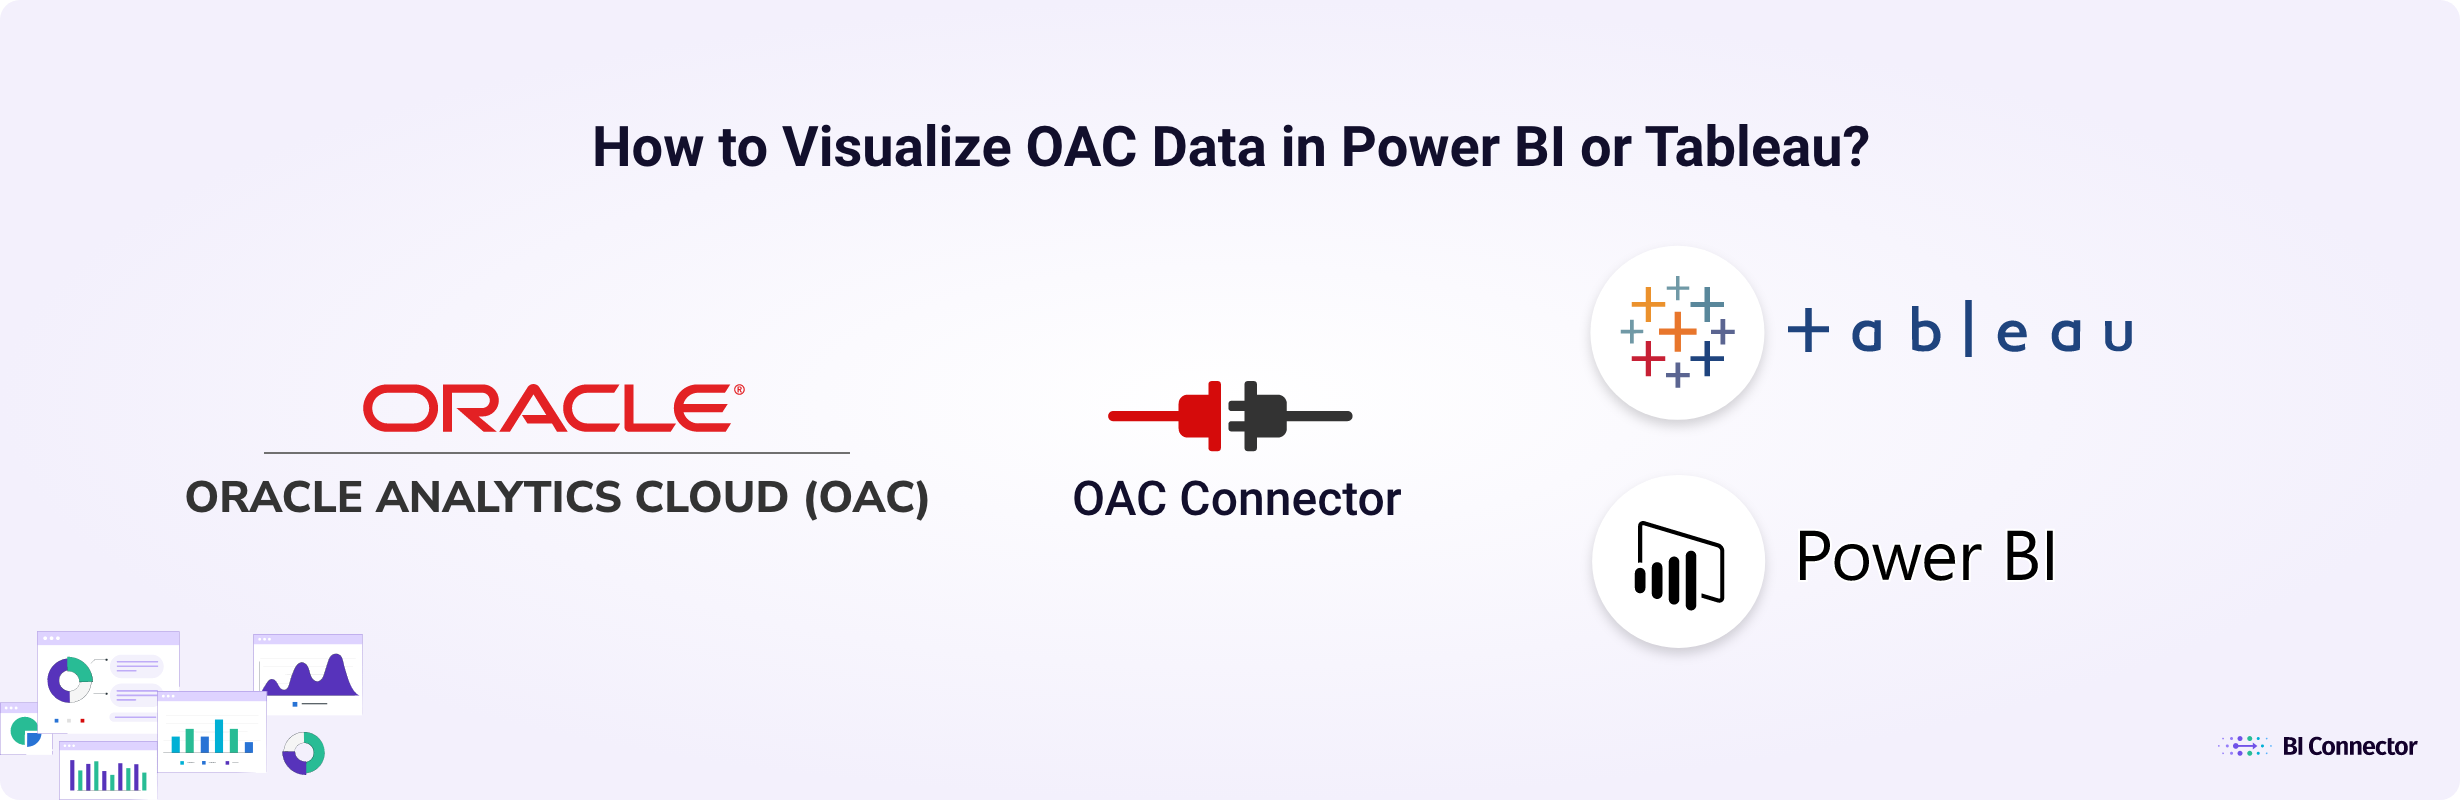 How to Visualize OAC Data in Power BI or Tableau using Oracle Analytics Cloud Connectors?